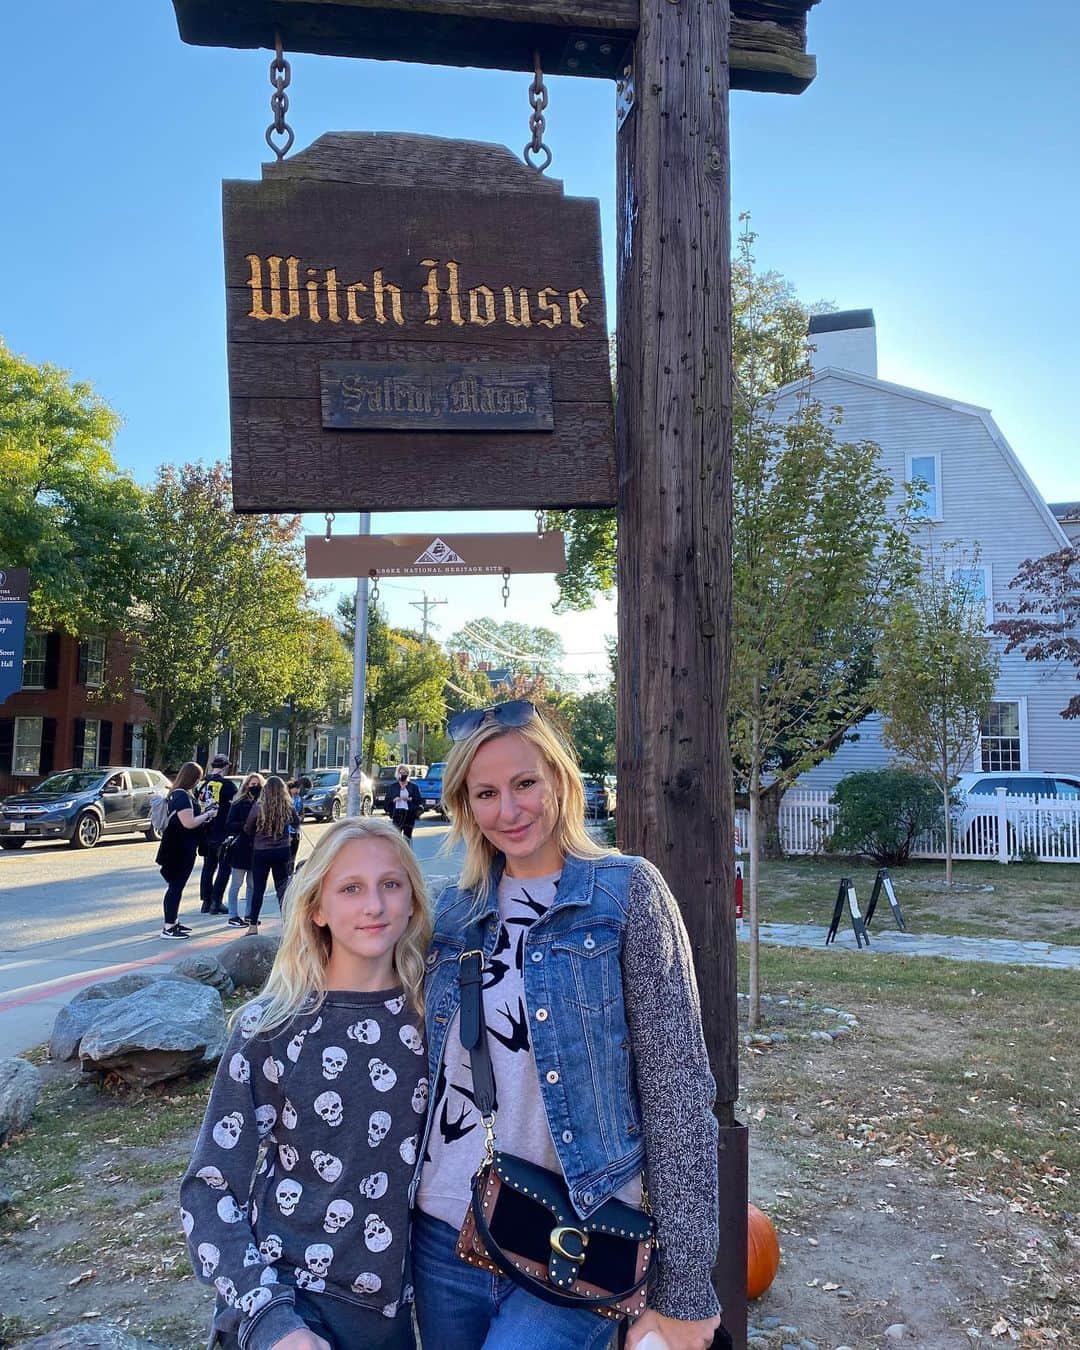 クリスティ・ルーカジアックさんのインスタグラム写真 - (クリスティ・ルーカジアックInstagram)「One of my favorite trips ever 🖤 Day Two New England itinerary... 🚗 Drive one hour to Salem 📖 House of Seven Gables - inspired Nathaniel Hawthornes novel. Just the gardens were open ⛓ Salem Witch Dungeon - performed a play to explain the Witch hysteria and trials of 1692, then took us in a recreated dungeon. 🧙🏻Witch House - only authentic building in Salem associated with the Witch Trials.  🧹Salem Witch Museum - a creepy Stations of the Cross   🚗 30 minutes to Lexington/concord  Things to Do:  🍁 Lexington Green - the first shots of the Revolutionary War were shot here and there is the most picturesque white church on the edge of the square. There is also a flag that flies 24/7 as a tribute to the beginning of our country.  🌳 Minute Man National Historic Park- walk this trail to see stops along the way telling the story of the night of Paul Reveres ride, including his capture point  📚 Orchard House - Louisa May Alcott family home. There is a Little Women garden and the original school on property that Mr. Alcott started  🍂 North Bridge - when American soldiers fired back on the British, this was the “shot heard round the world” and started the war  ✍️Sleepy Hollow Cemetery - Four famous writers are buried here in Authors Ridge: Louisa May Alcott, Henry David Thoreau, Nathaniel Hawthorne & Ralph Waldo Emerson  🍁 Walden pond - beautiful 2 mile hike around the famous pond. You can find the foundation of Thoreau’s cabin where he wrote Walden Pond  🍨 Bedford Farms ice cream - best ice cream ever  🍝 Fiorella’s Italian - all around excellent  ☕️Town meeting bistro - this was my favorite meal of the entire trip. We did Sunday brunch and the atmosphere, service and food was superior.  🚗 30 mins to Boston  ⛲️ Boston Gardens - beautiful park, next to Boston Commons  🍺 Cheers Bar - the bar that inspired Cheer. Must drink beer.  🐴 Freedom Trail - a trail that is actually embedded in the streets of Boston. Follow it for 2.5 miles to see important landmarks from the Revolution, including the North Church.  👩🏻‍🎓 Harvard tour - considering Clara has plans to attend Harvard, we hired a guide to show us around the famous campus. She loved every minute of it. 💗」10月21日 2時04分 - christilukasiak